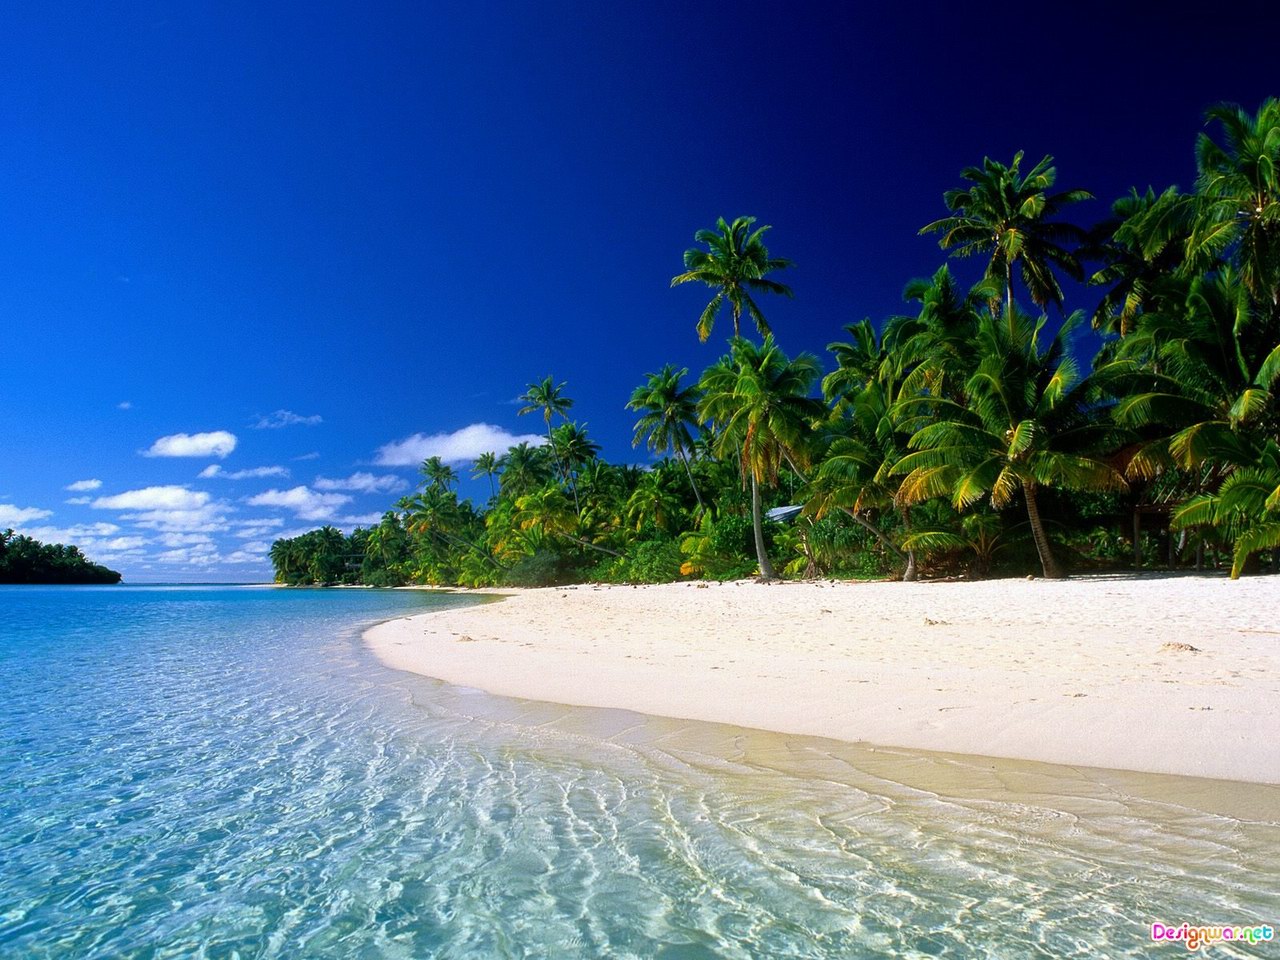  Tropical Beach hd Wallpaper and make this wallpaper for your desktop